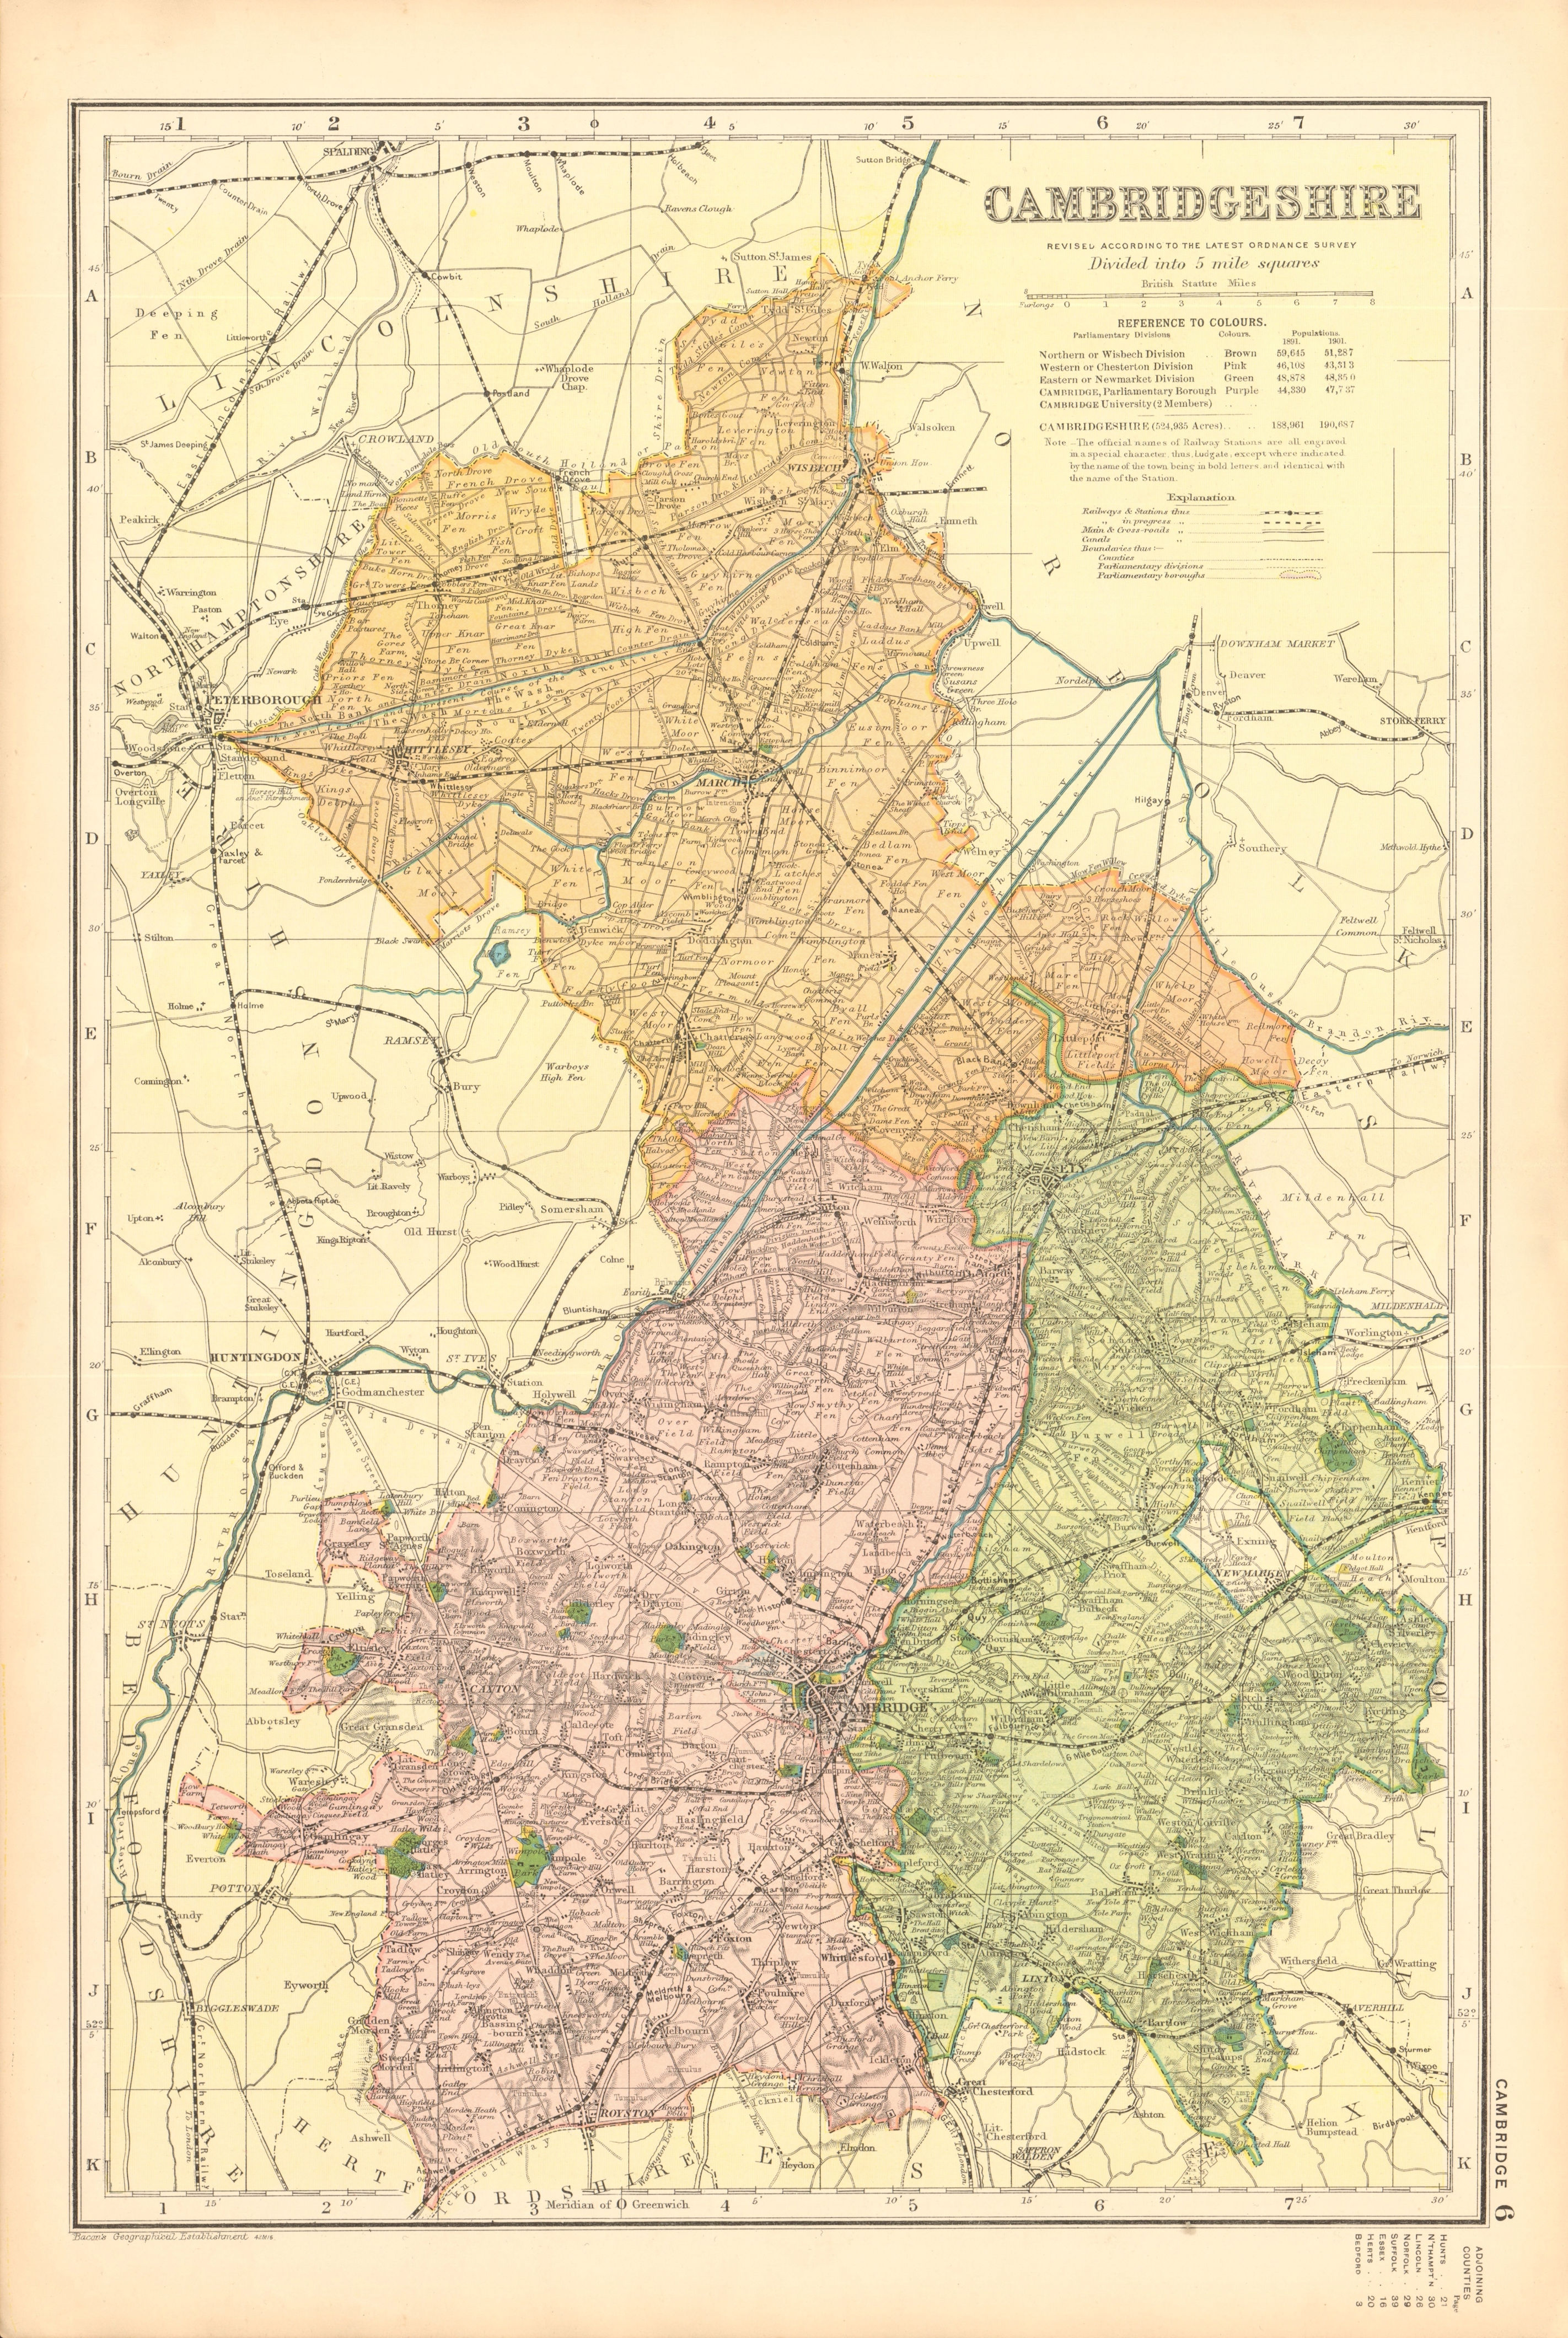 Associate Product CAMBRIDGESHIRE. Showing Parliamentary divisions,boroughs & parks.BACON 1904 map